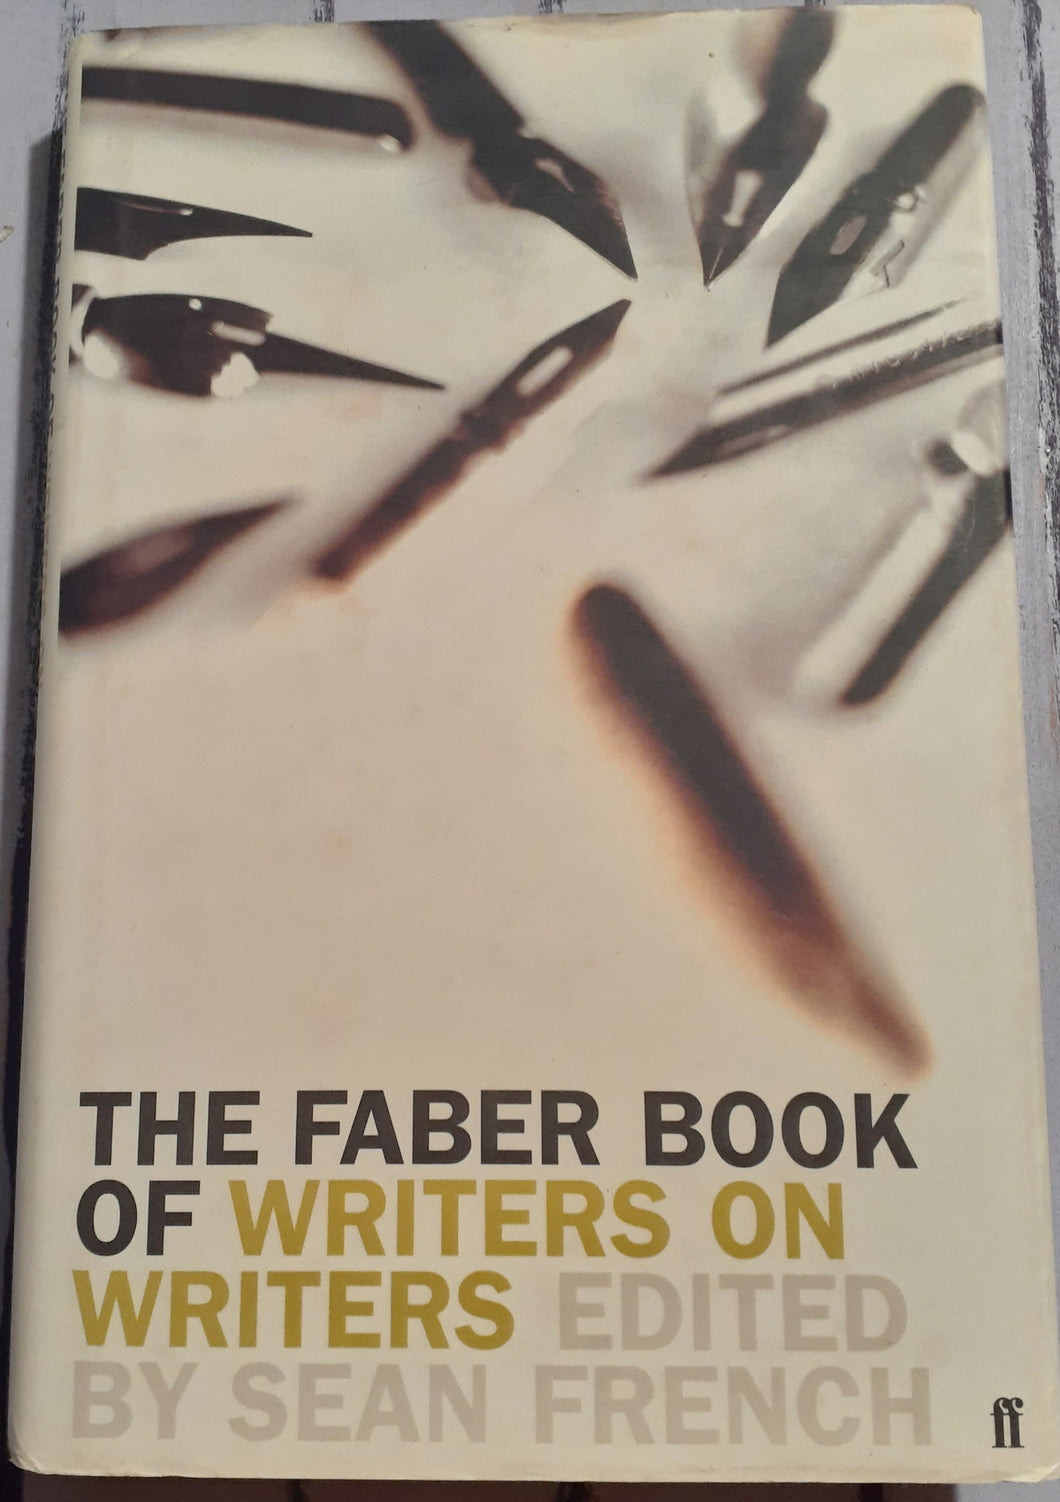 The Faber Book of Writers on Writers